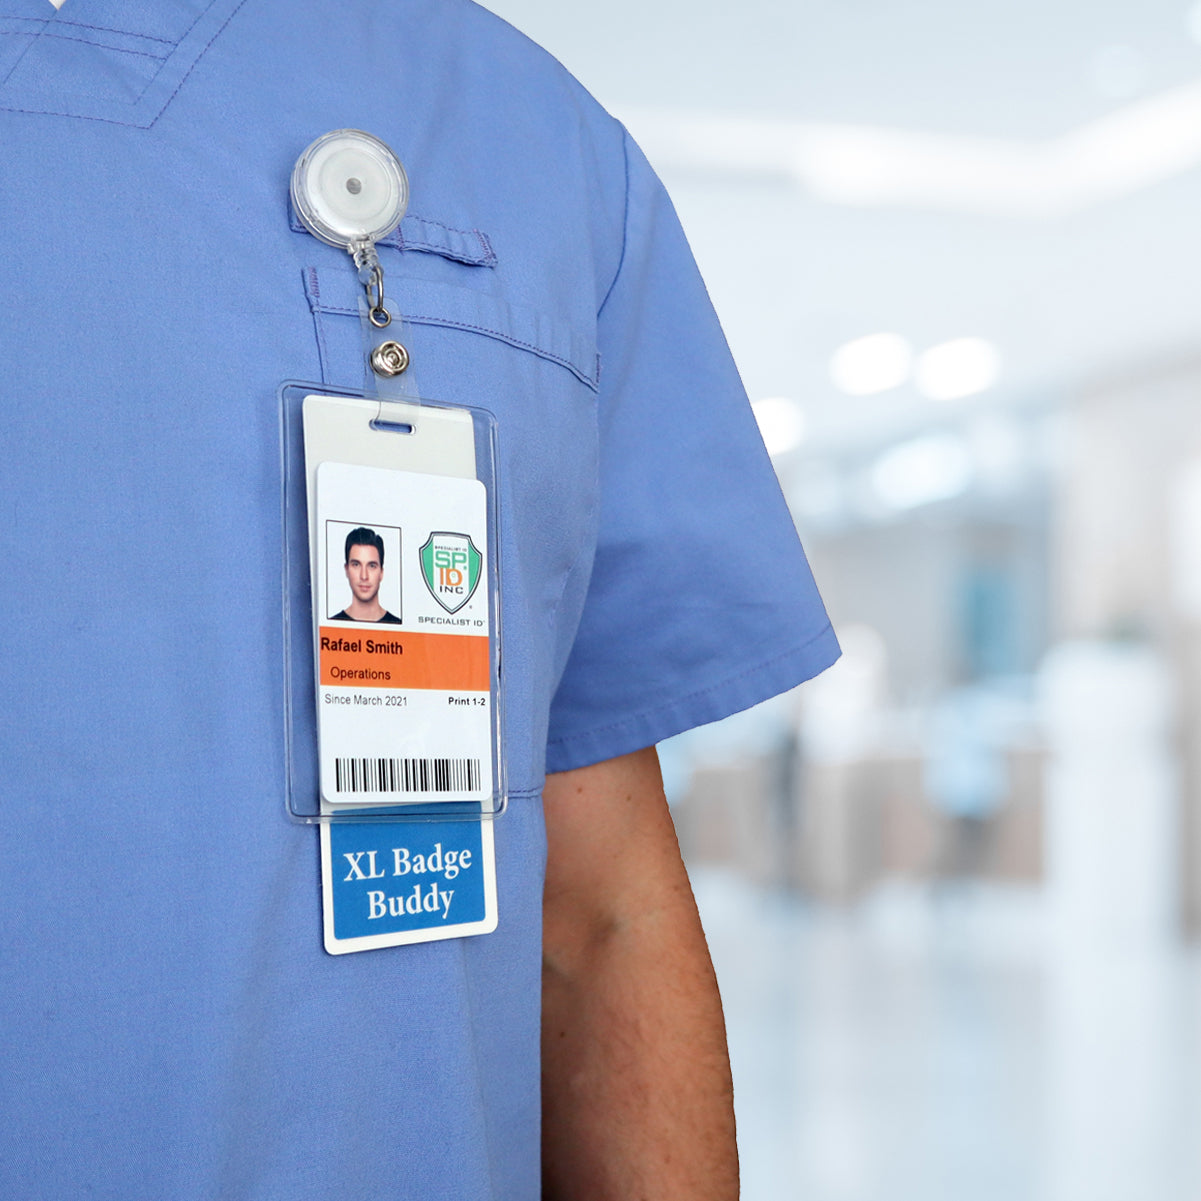 A close-up shows the chest area of a person wearing blue medical scrubs. The visible Oversized NURSE Badge Buddy - Extra Large Badge Buddies for Nurses - Vertical Hospital ID Badge Backer reads "Rafael Smith" and identifies them as an operations staff member. The background is a blurred indoor healthcare setting.